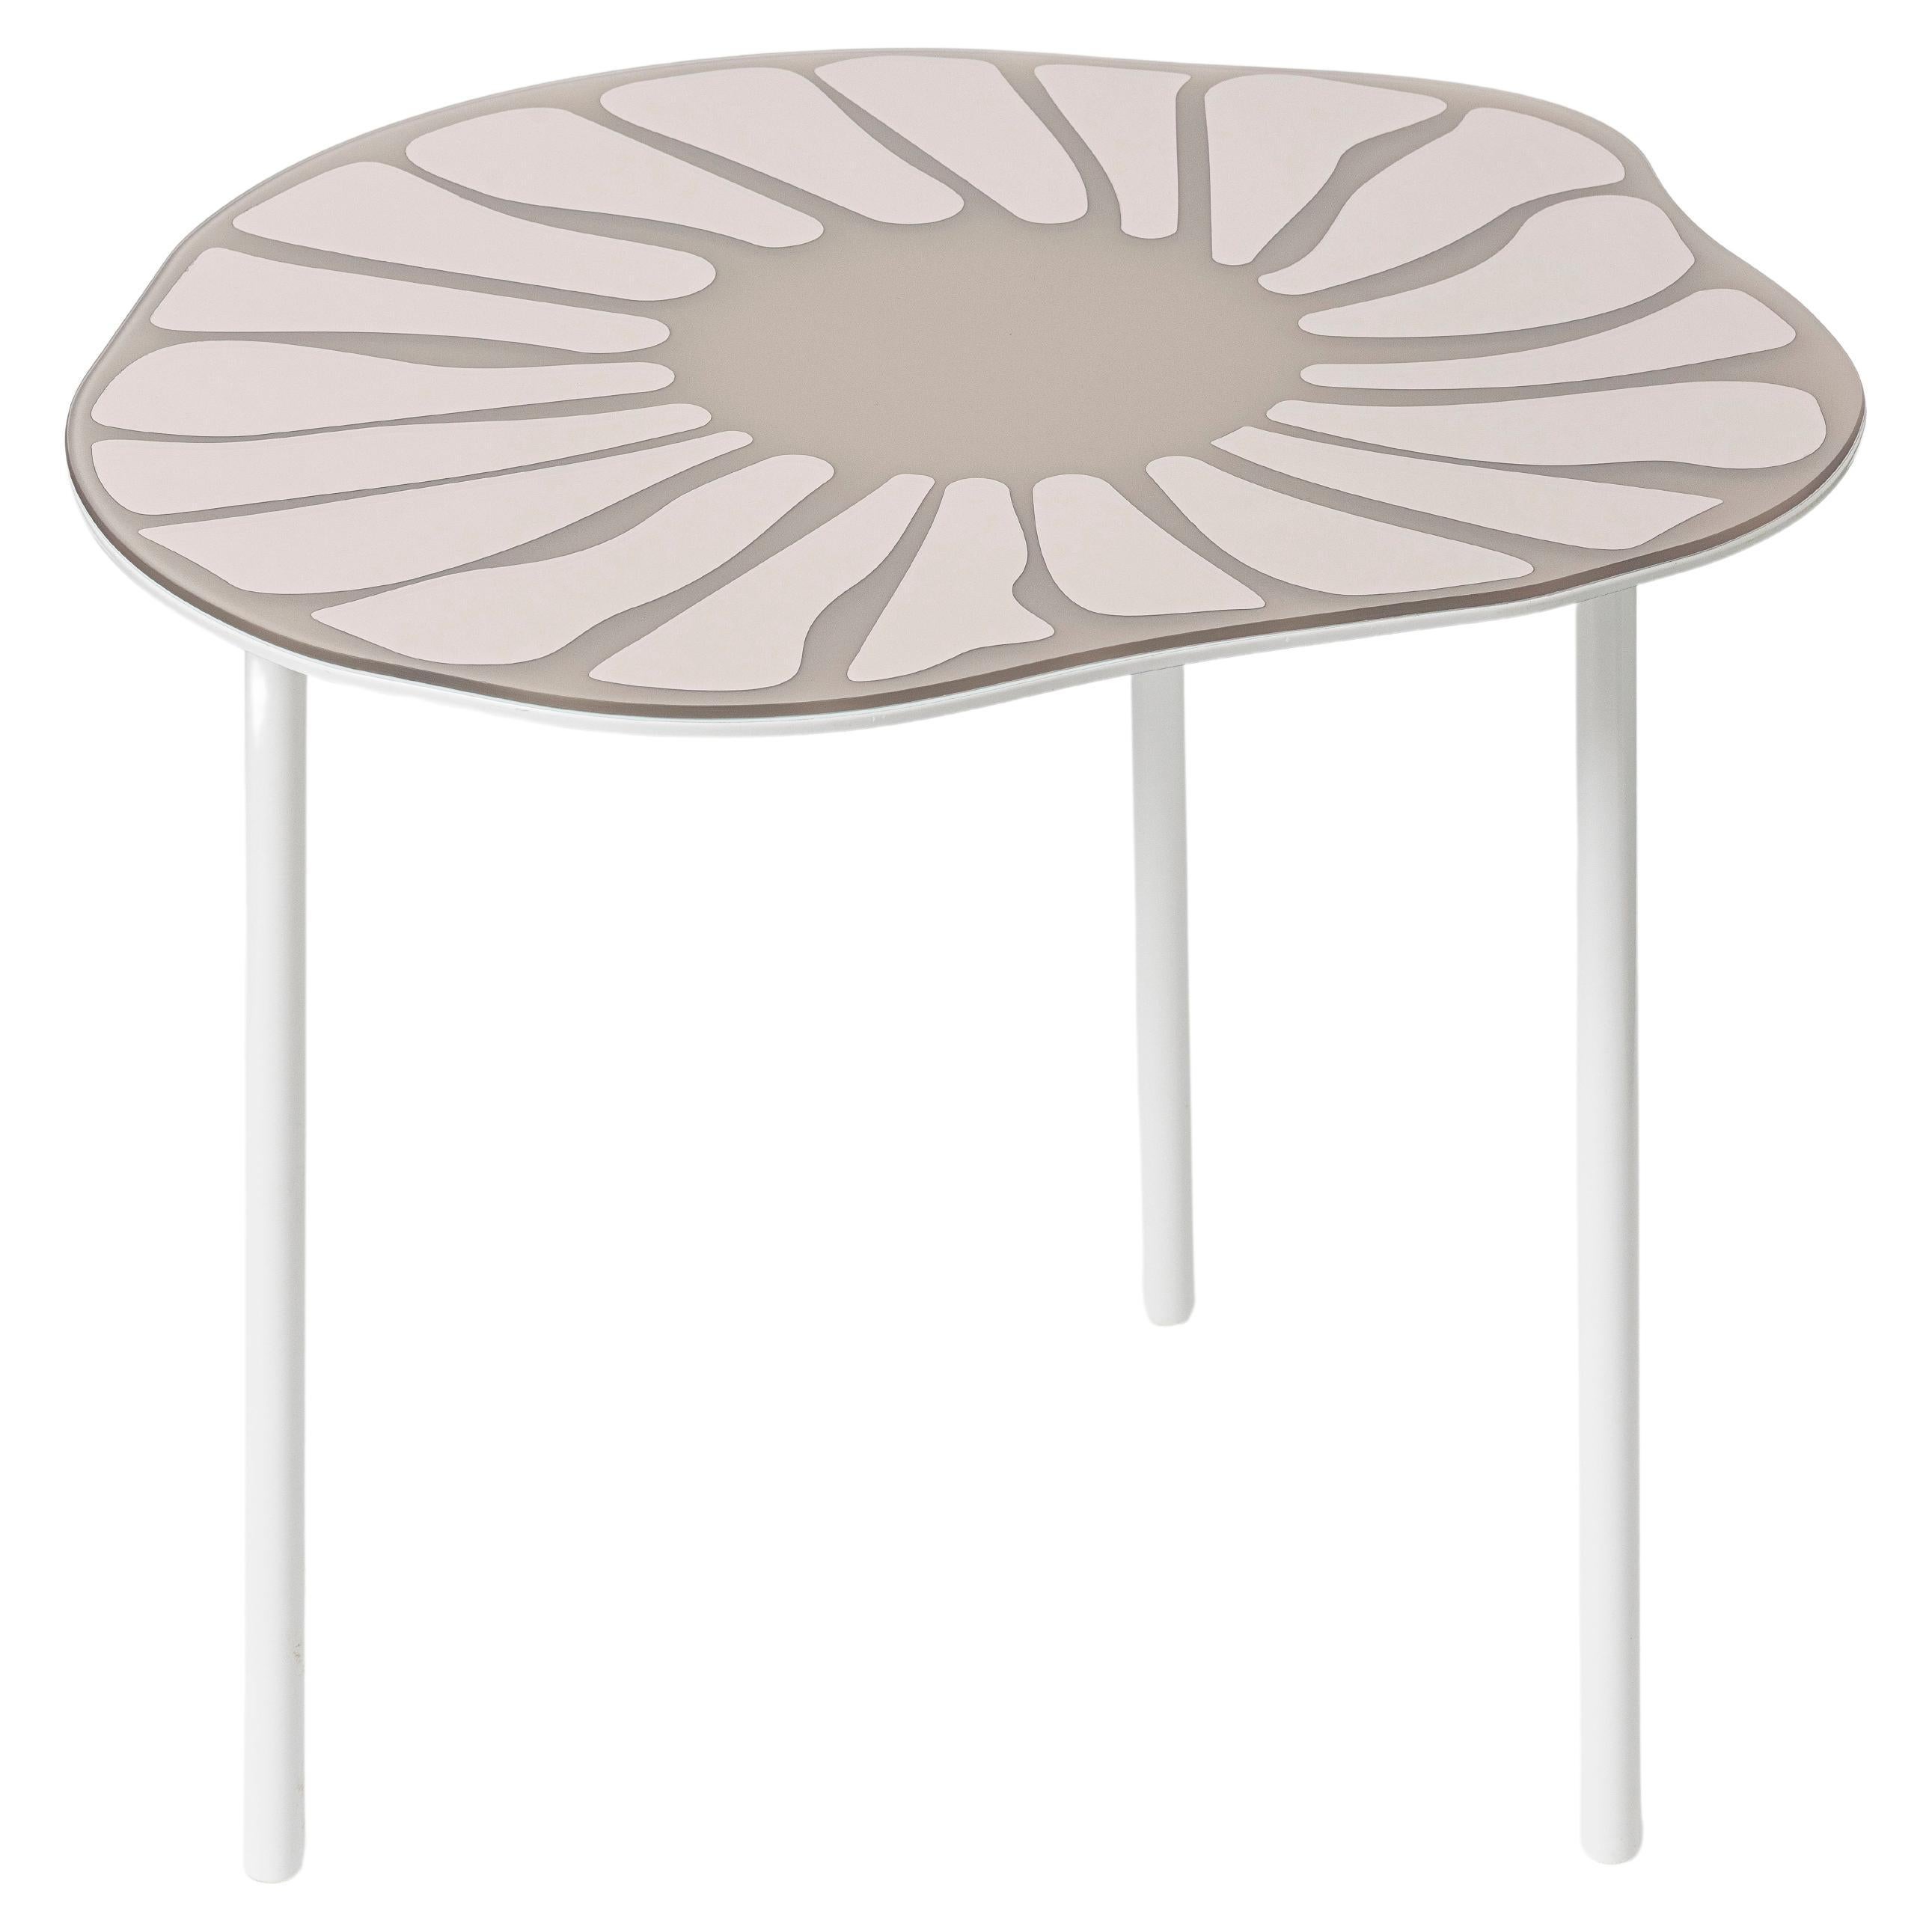 Coffee table with mirrored surfaces and removable metal legs For Sale